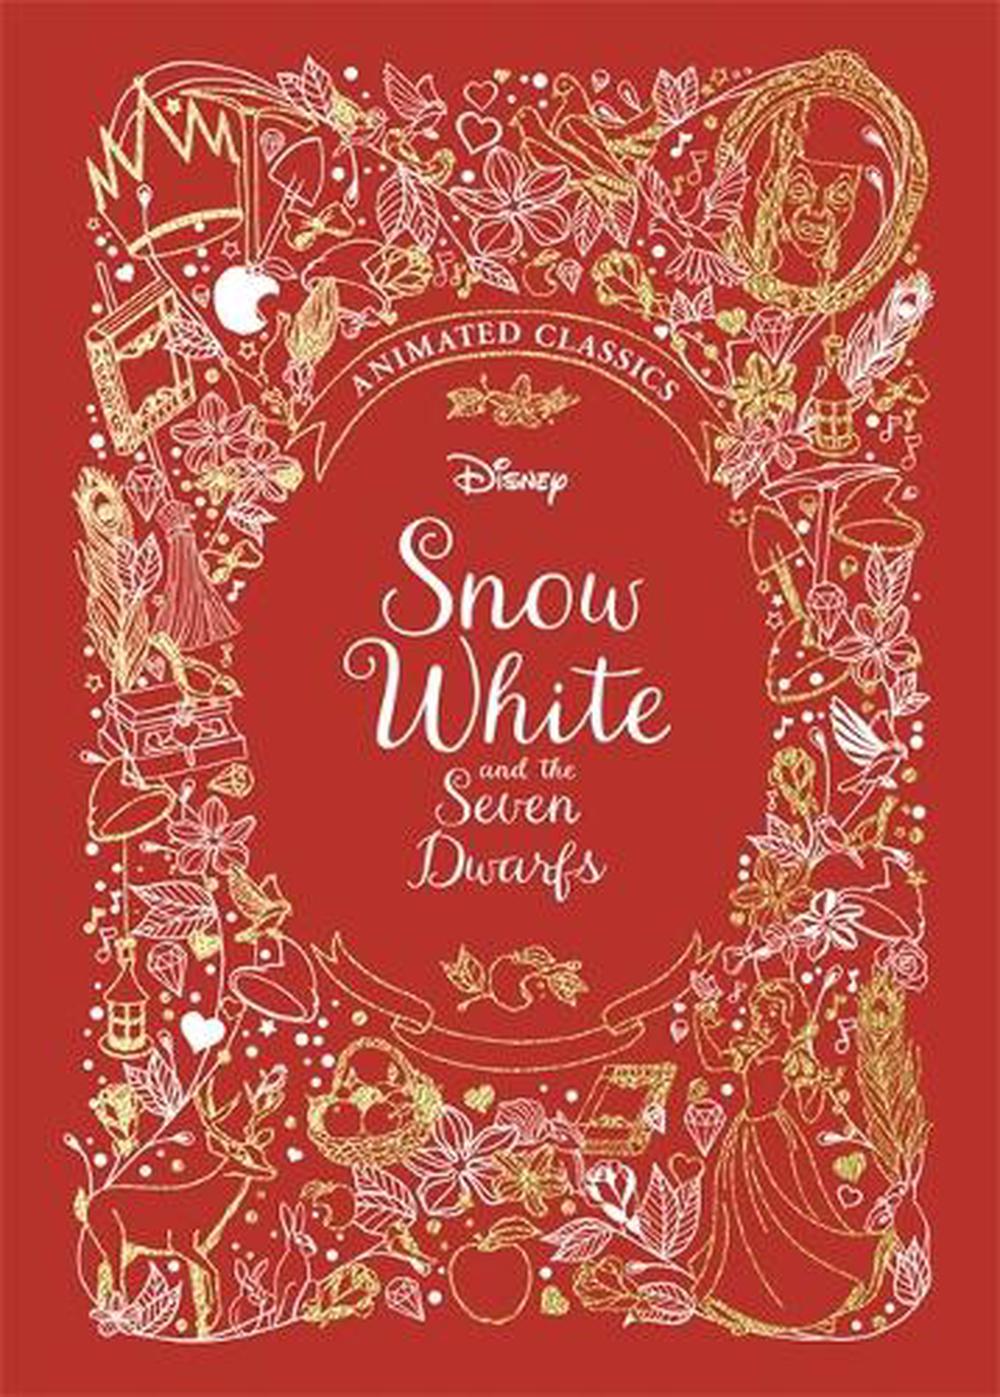 Snow White And The Seven Dwarfs Disney Animated Classics By Lily Murray Hardcover 